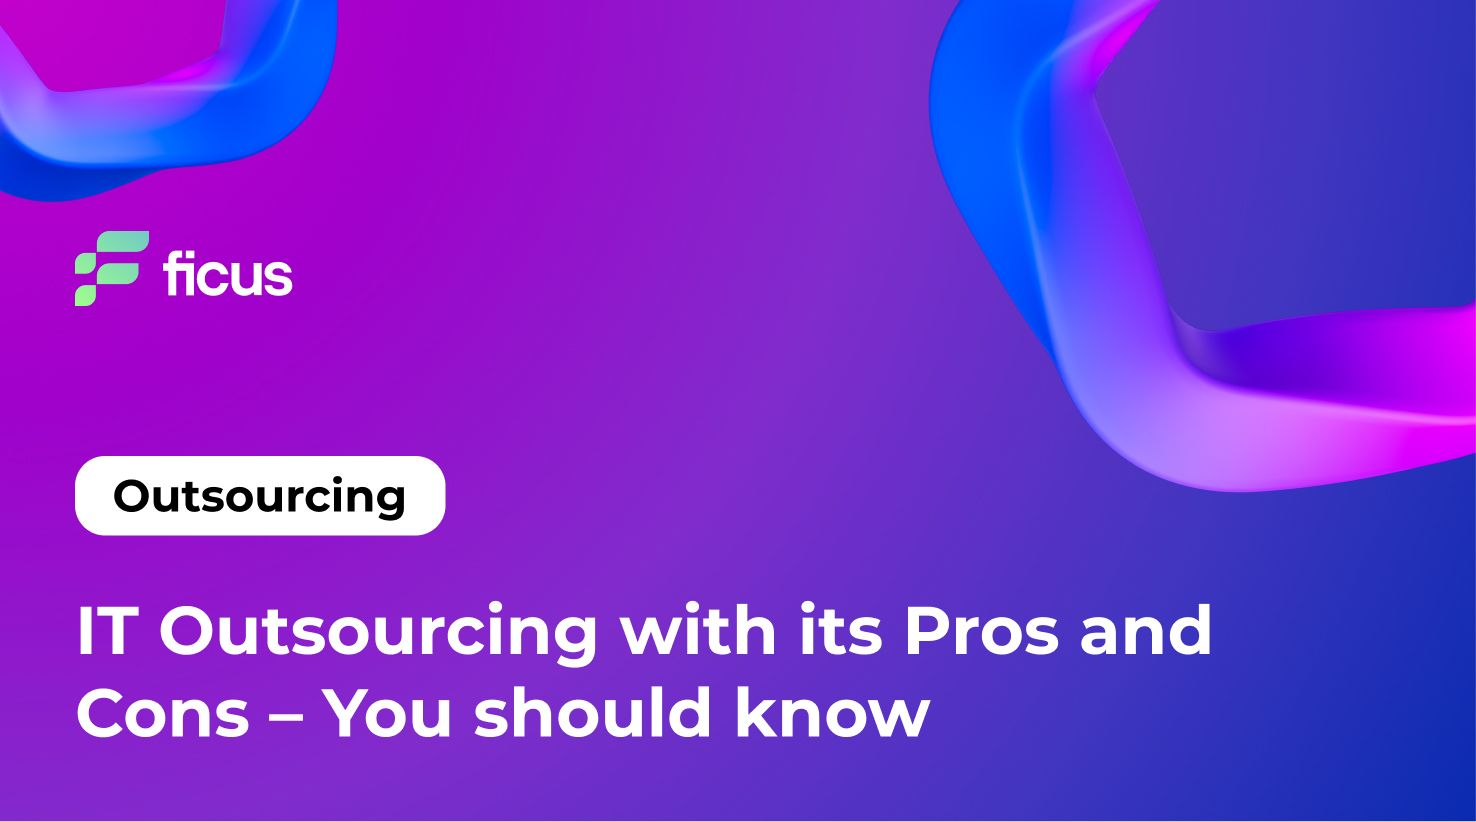 IT Outsourcing with its Pros and Cons &#8211; You should know